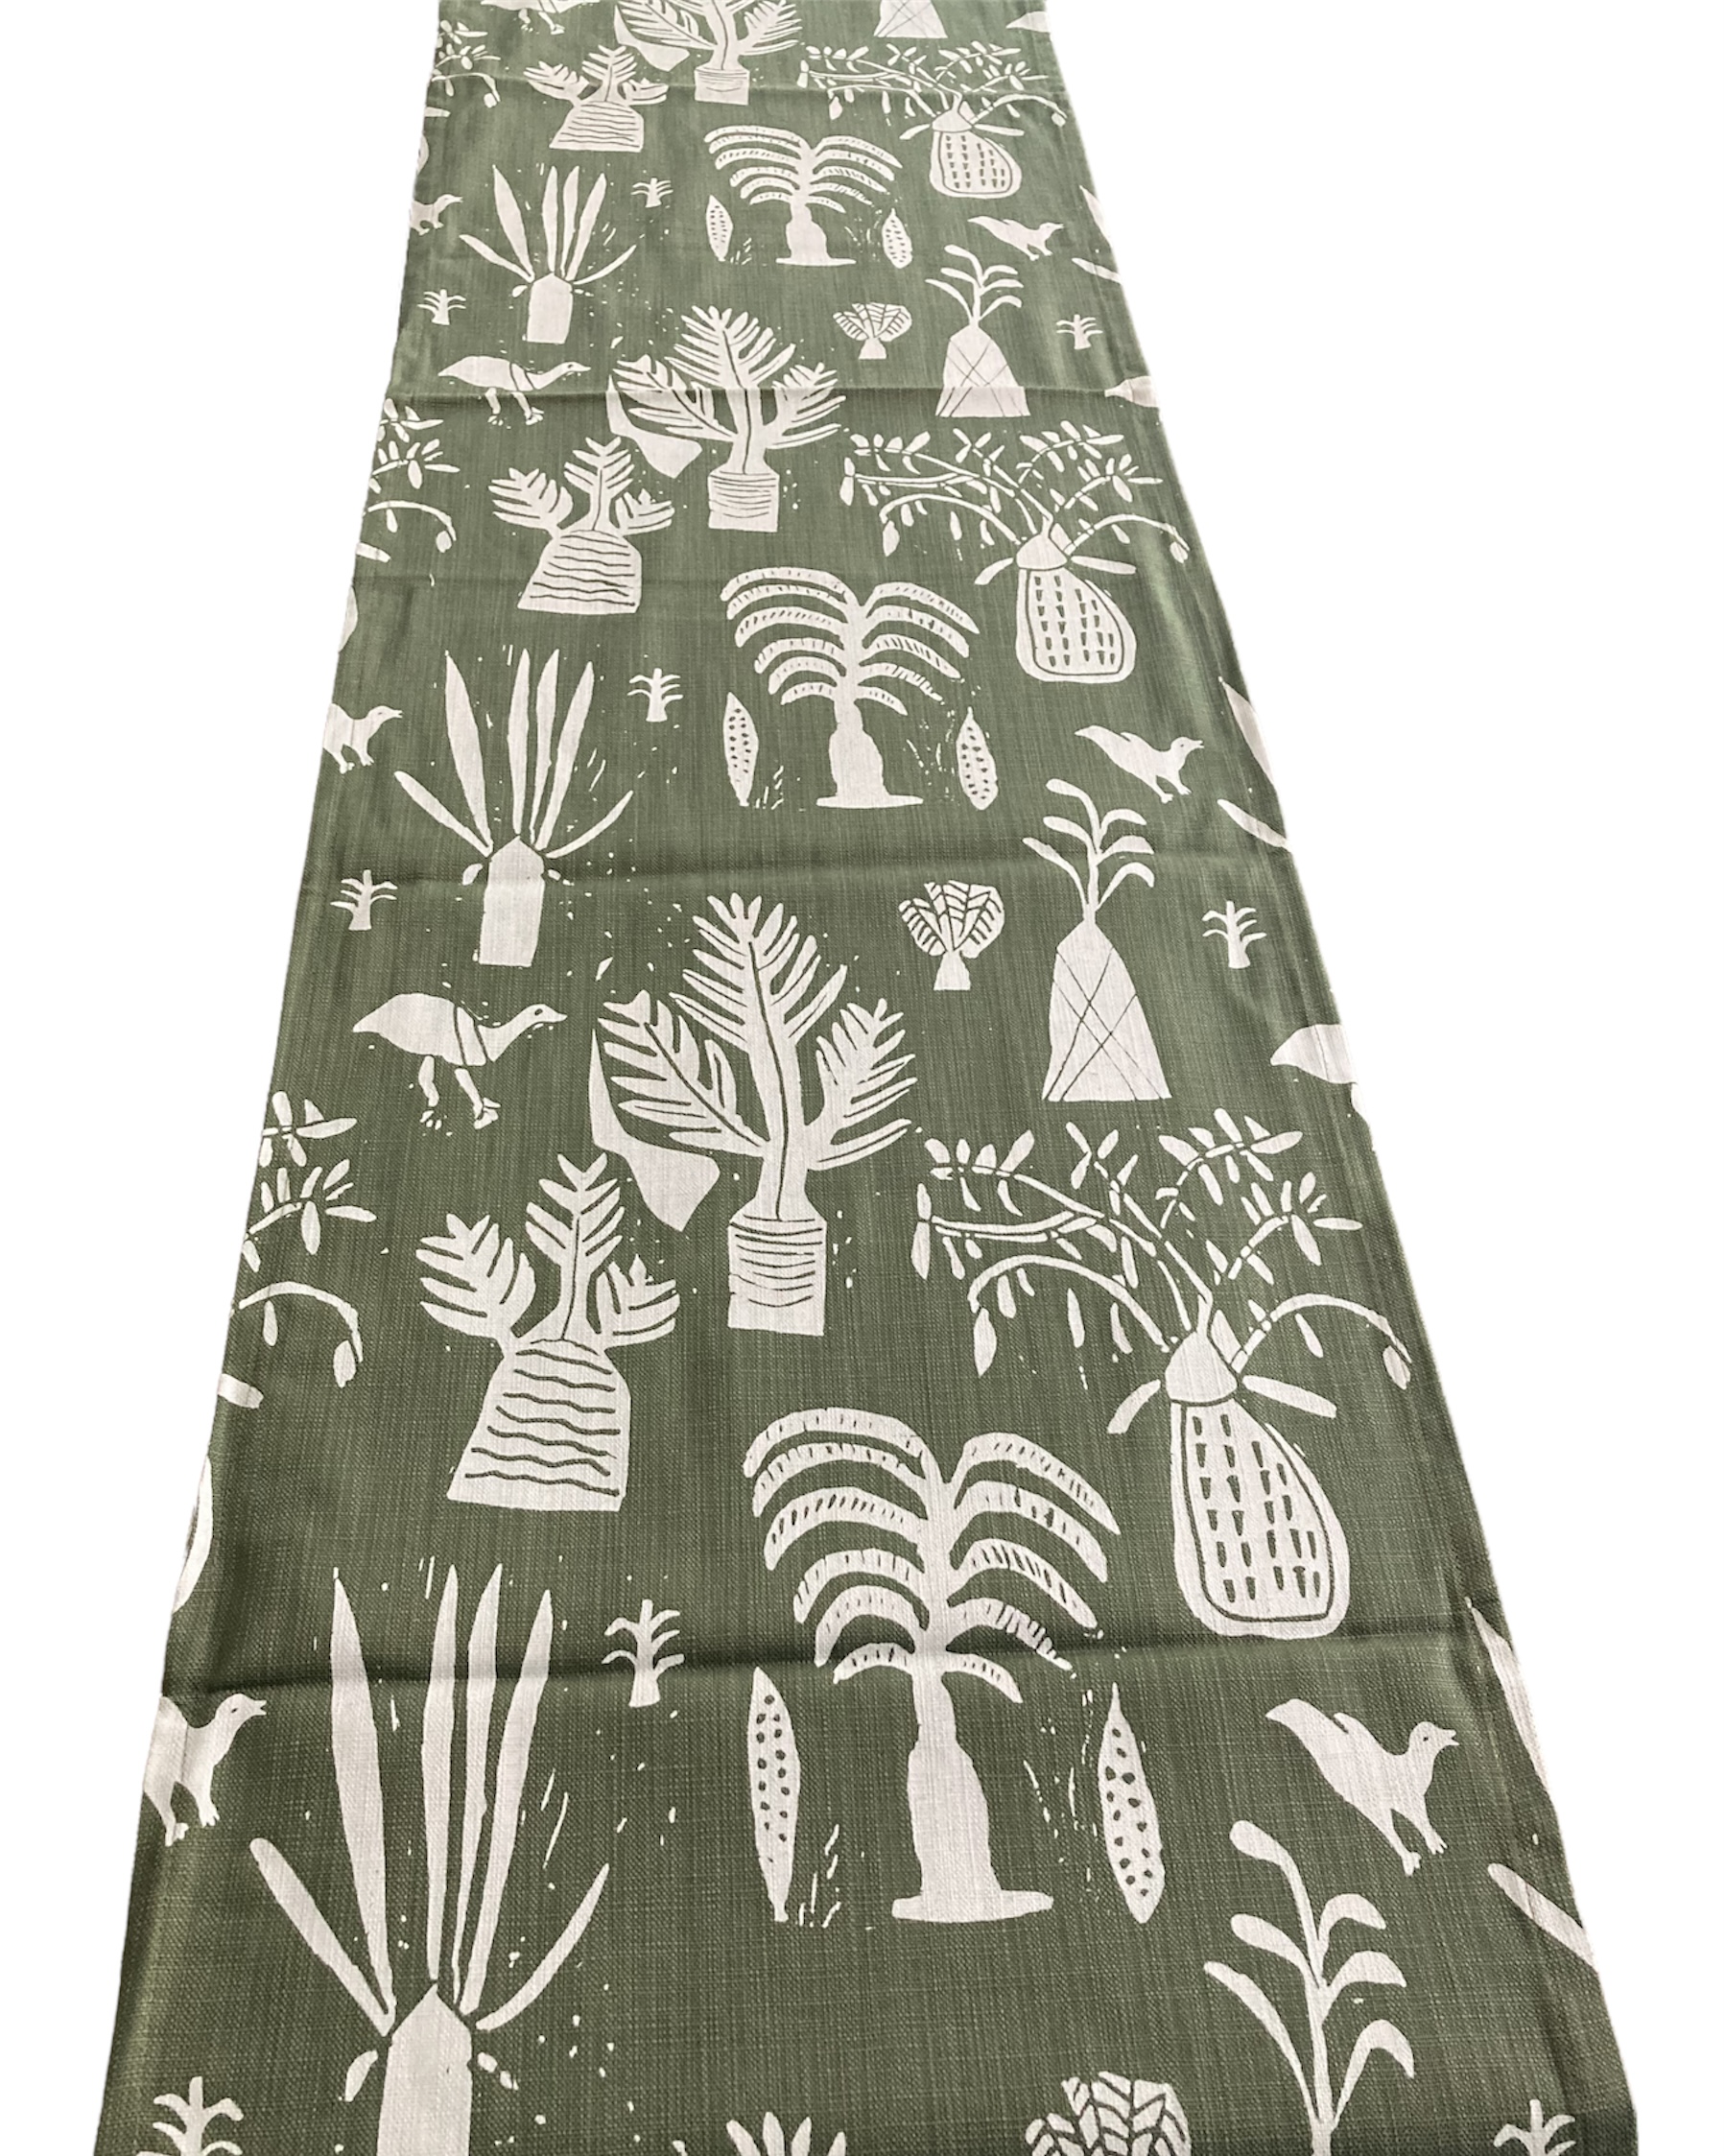 100% cotton Table Runner 96" x 16" from Namibia - Design 11l